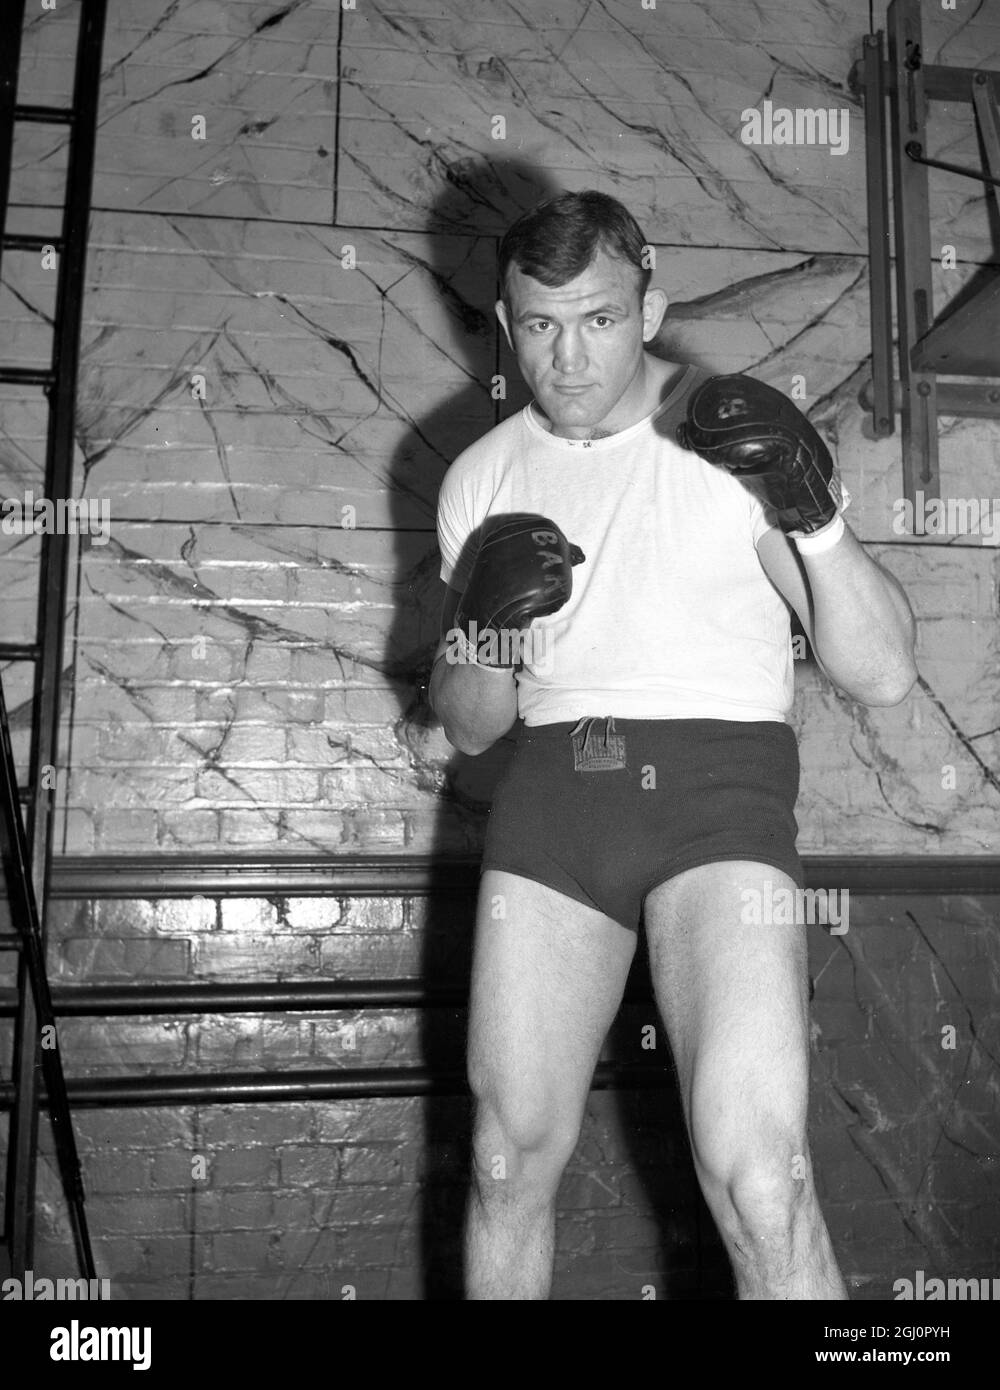 Joe Baksi , 26-year-old Polish-American heavyweight from Pennsylvania , who recently arrived in London fight , has gone into strict training for his fight with Freddie Mills at Harringay , London on 5 Novebmer . Photo shows: Joe Baksi's fighting fists get busy at Jack Solomon's gymnasium in London 23 October 1946 Stock Photo